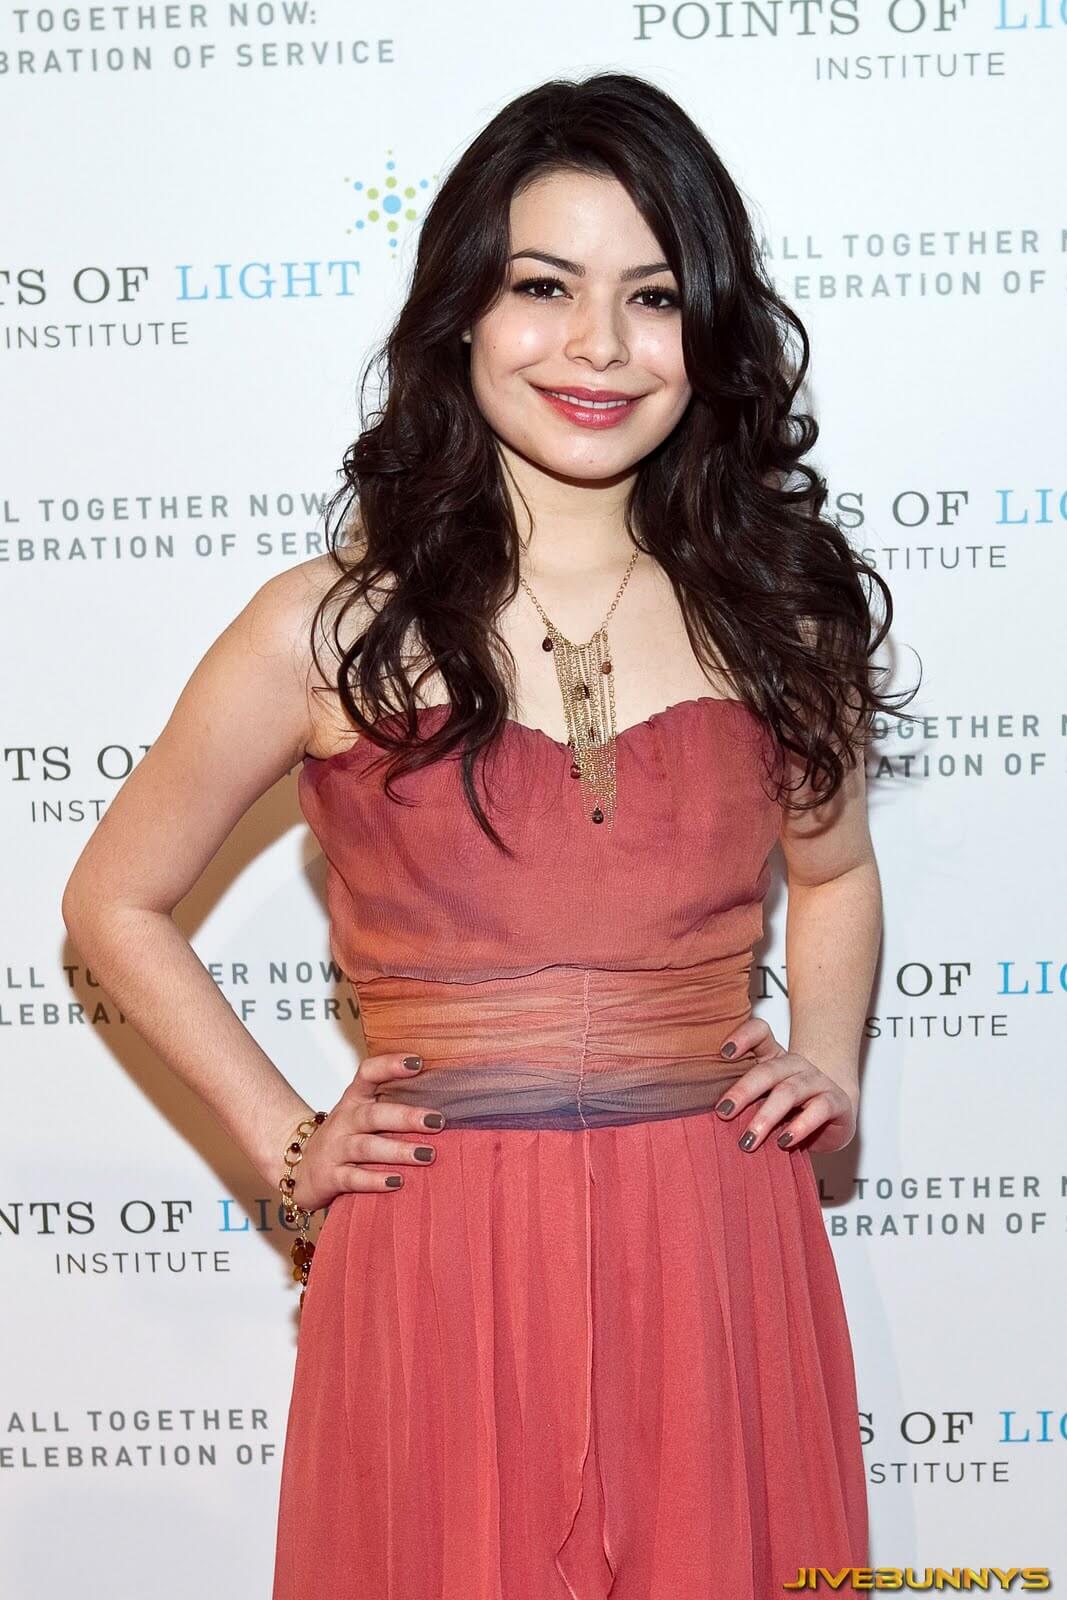 49 Miranda Cosgrove Nude Pictures Which Are Sure To Keep You Charmed With Her Charisma 49